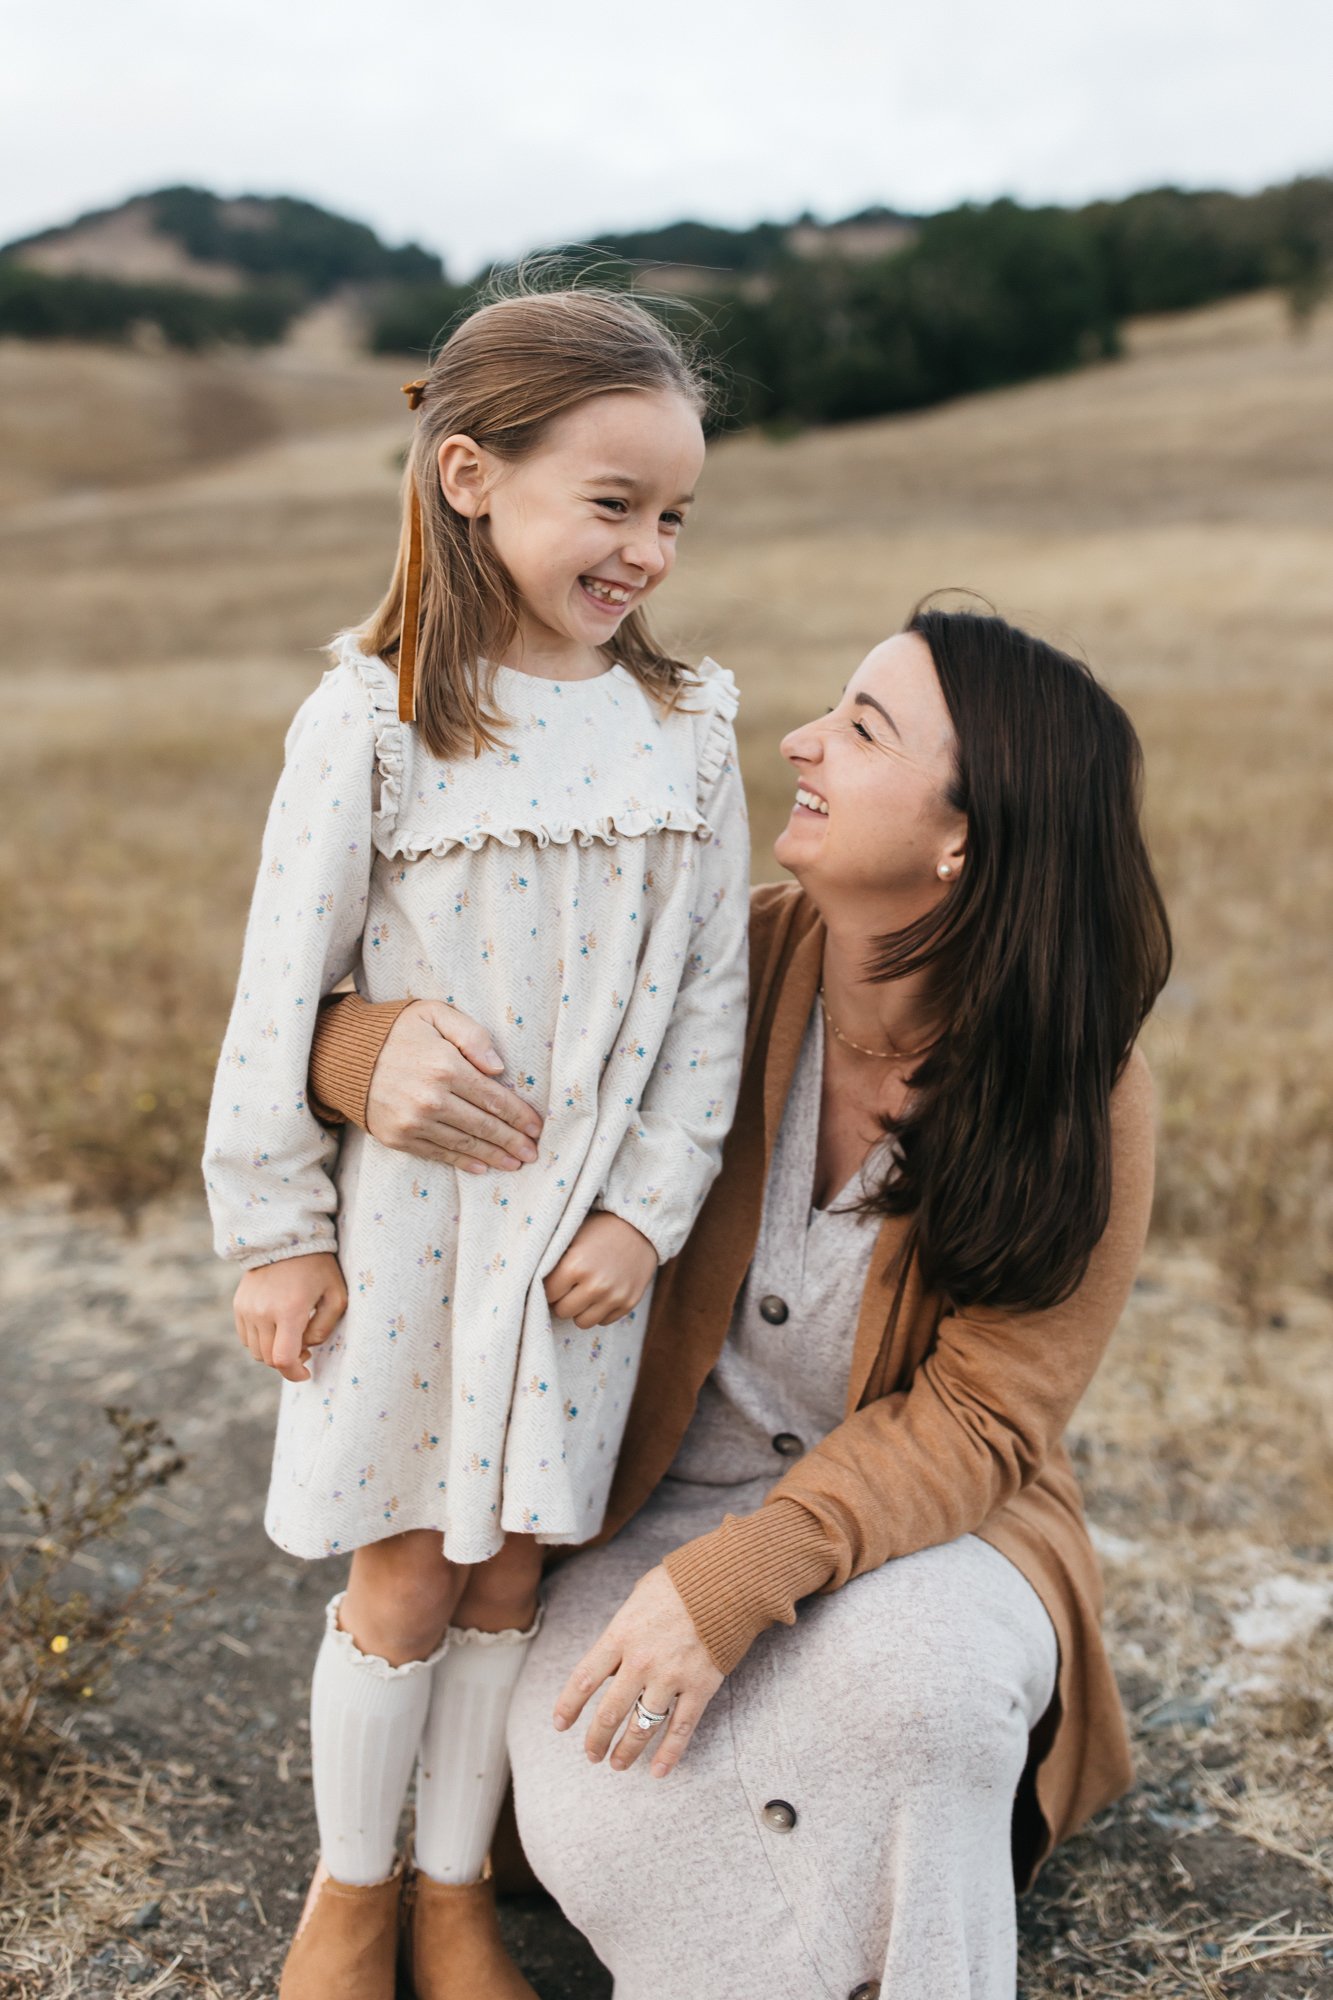 outdoor family outfit photo ideas from san francisco family photographer and marin family photographer Cristin More_9.jpg